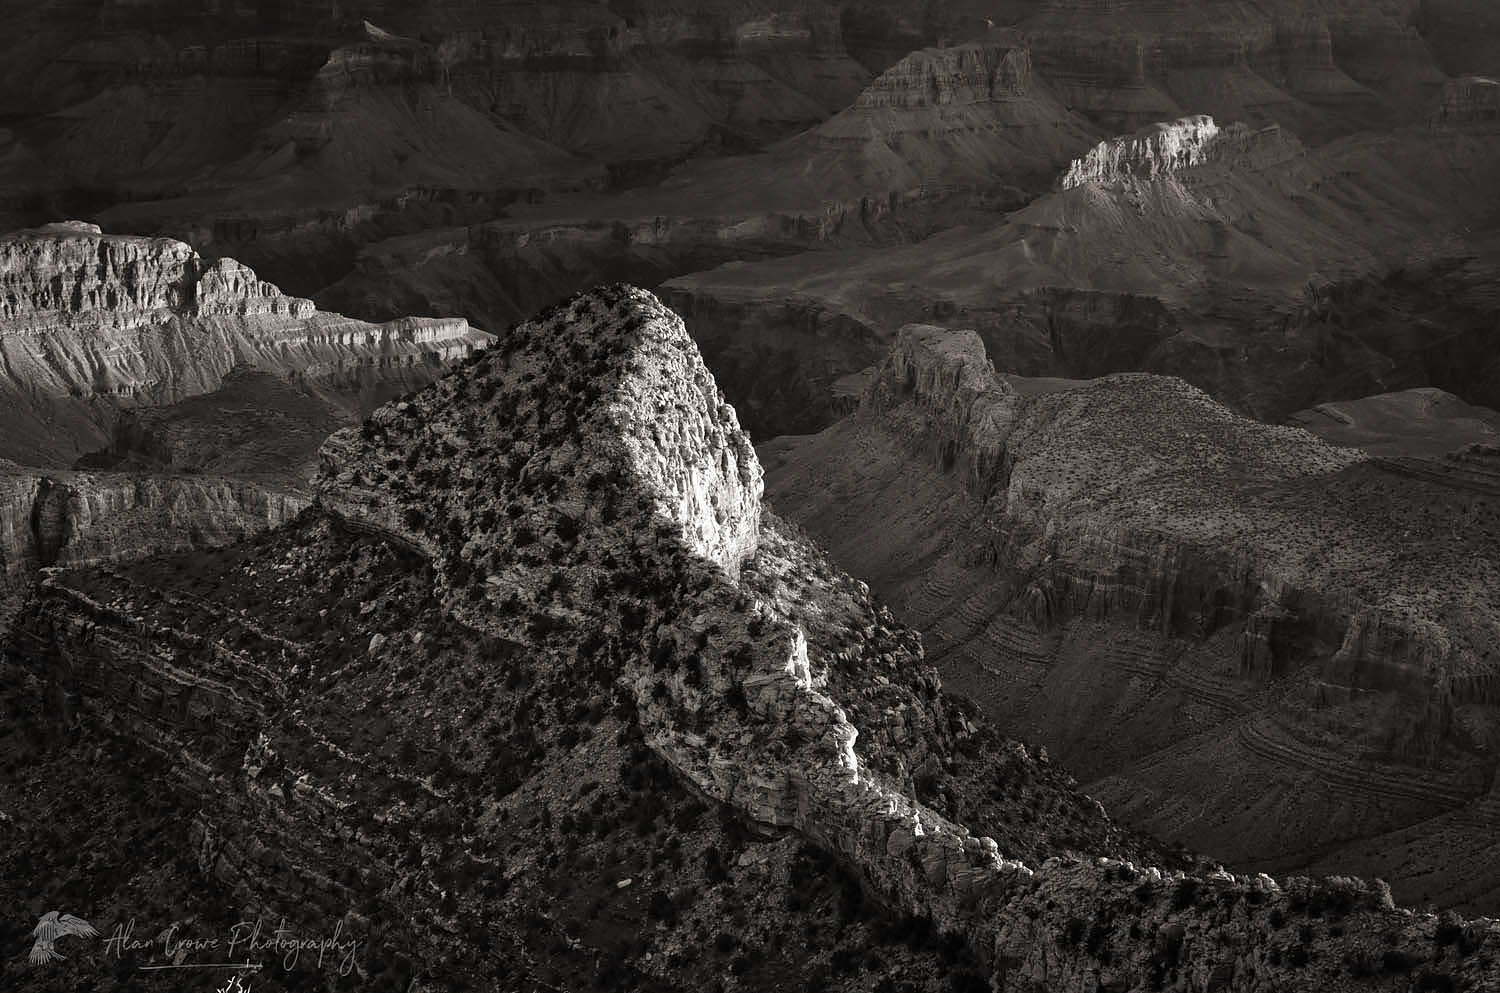 Sunrise over the Grand Canyon, Grand Canyon National Park #55590bw